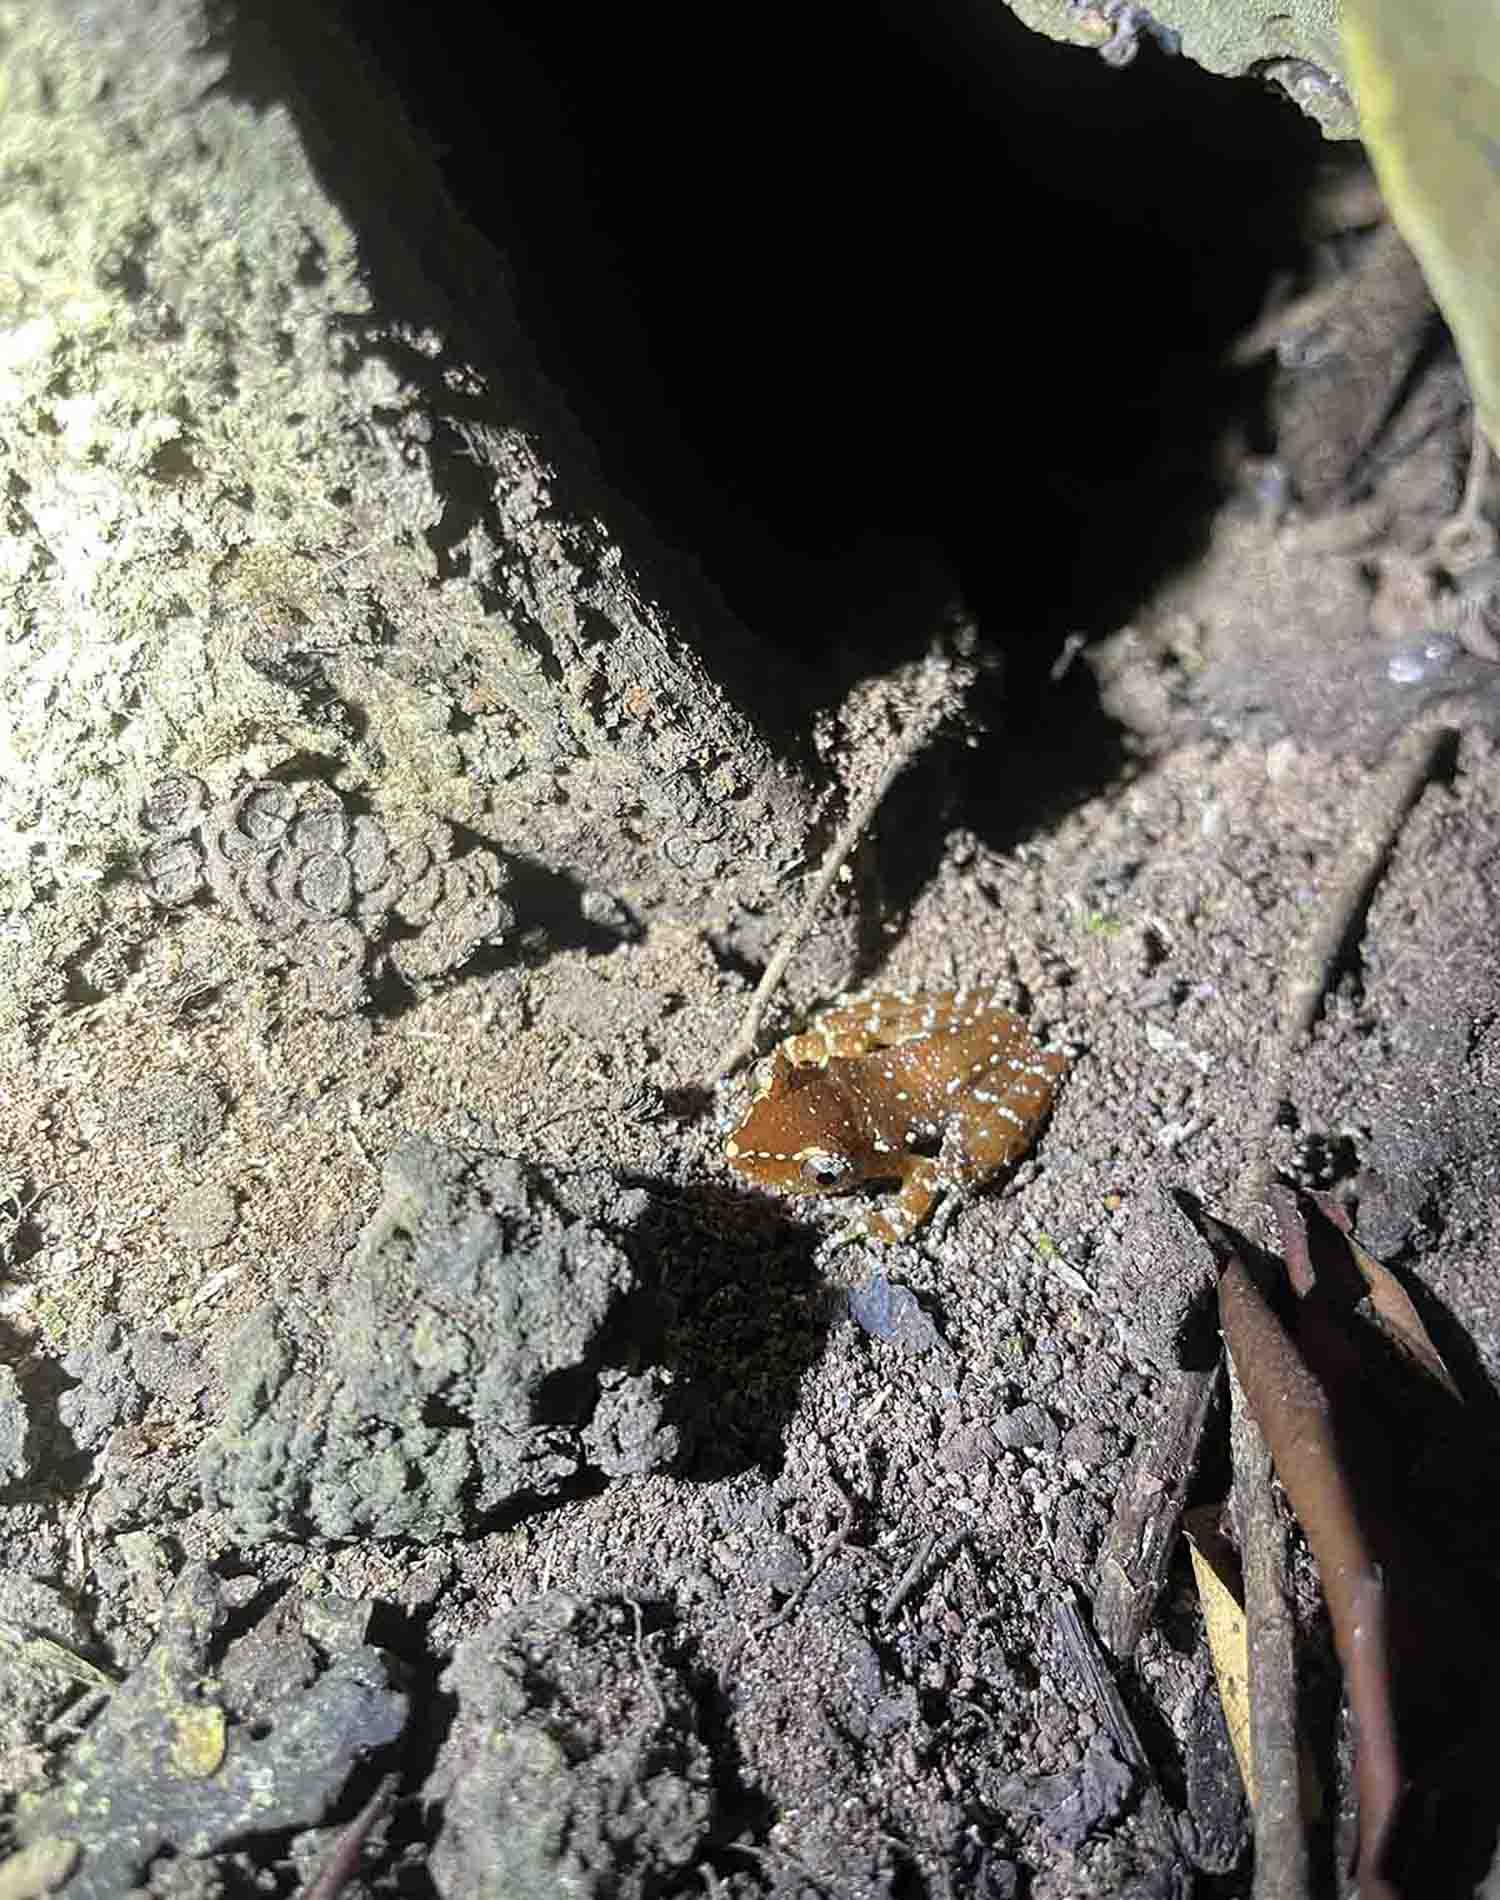 Cinnamon Frog, taken by Hannah Shapland in Kinabatangan, Sabah, during her placement at DGFC